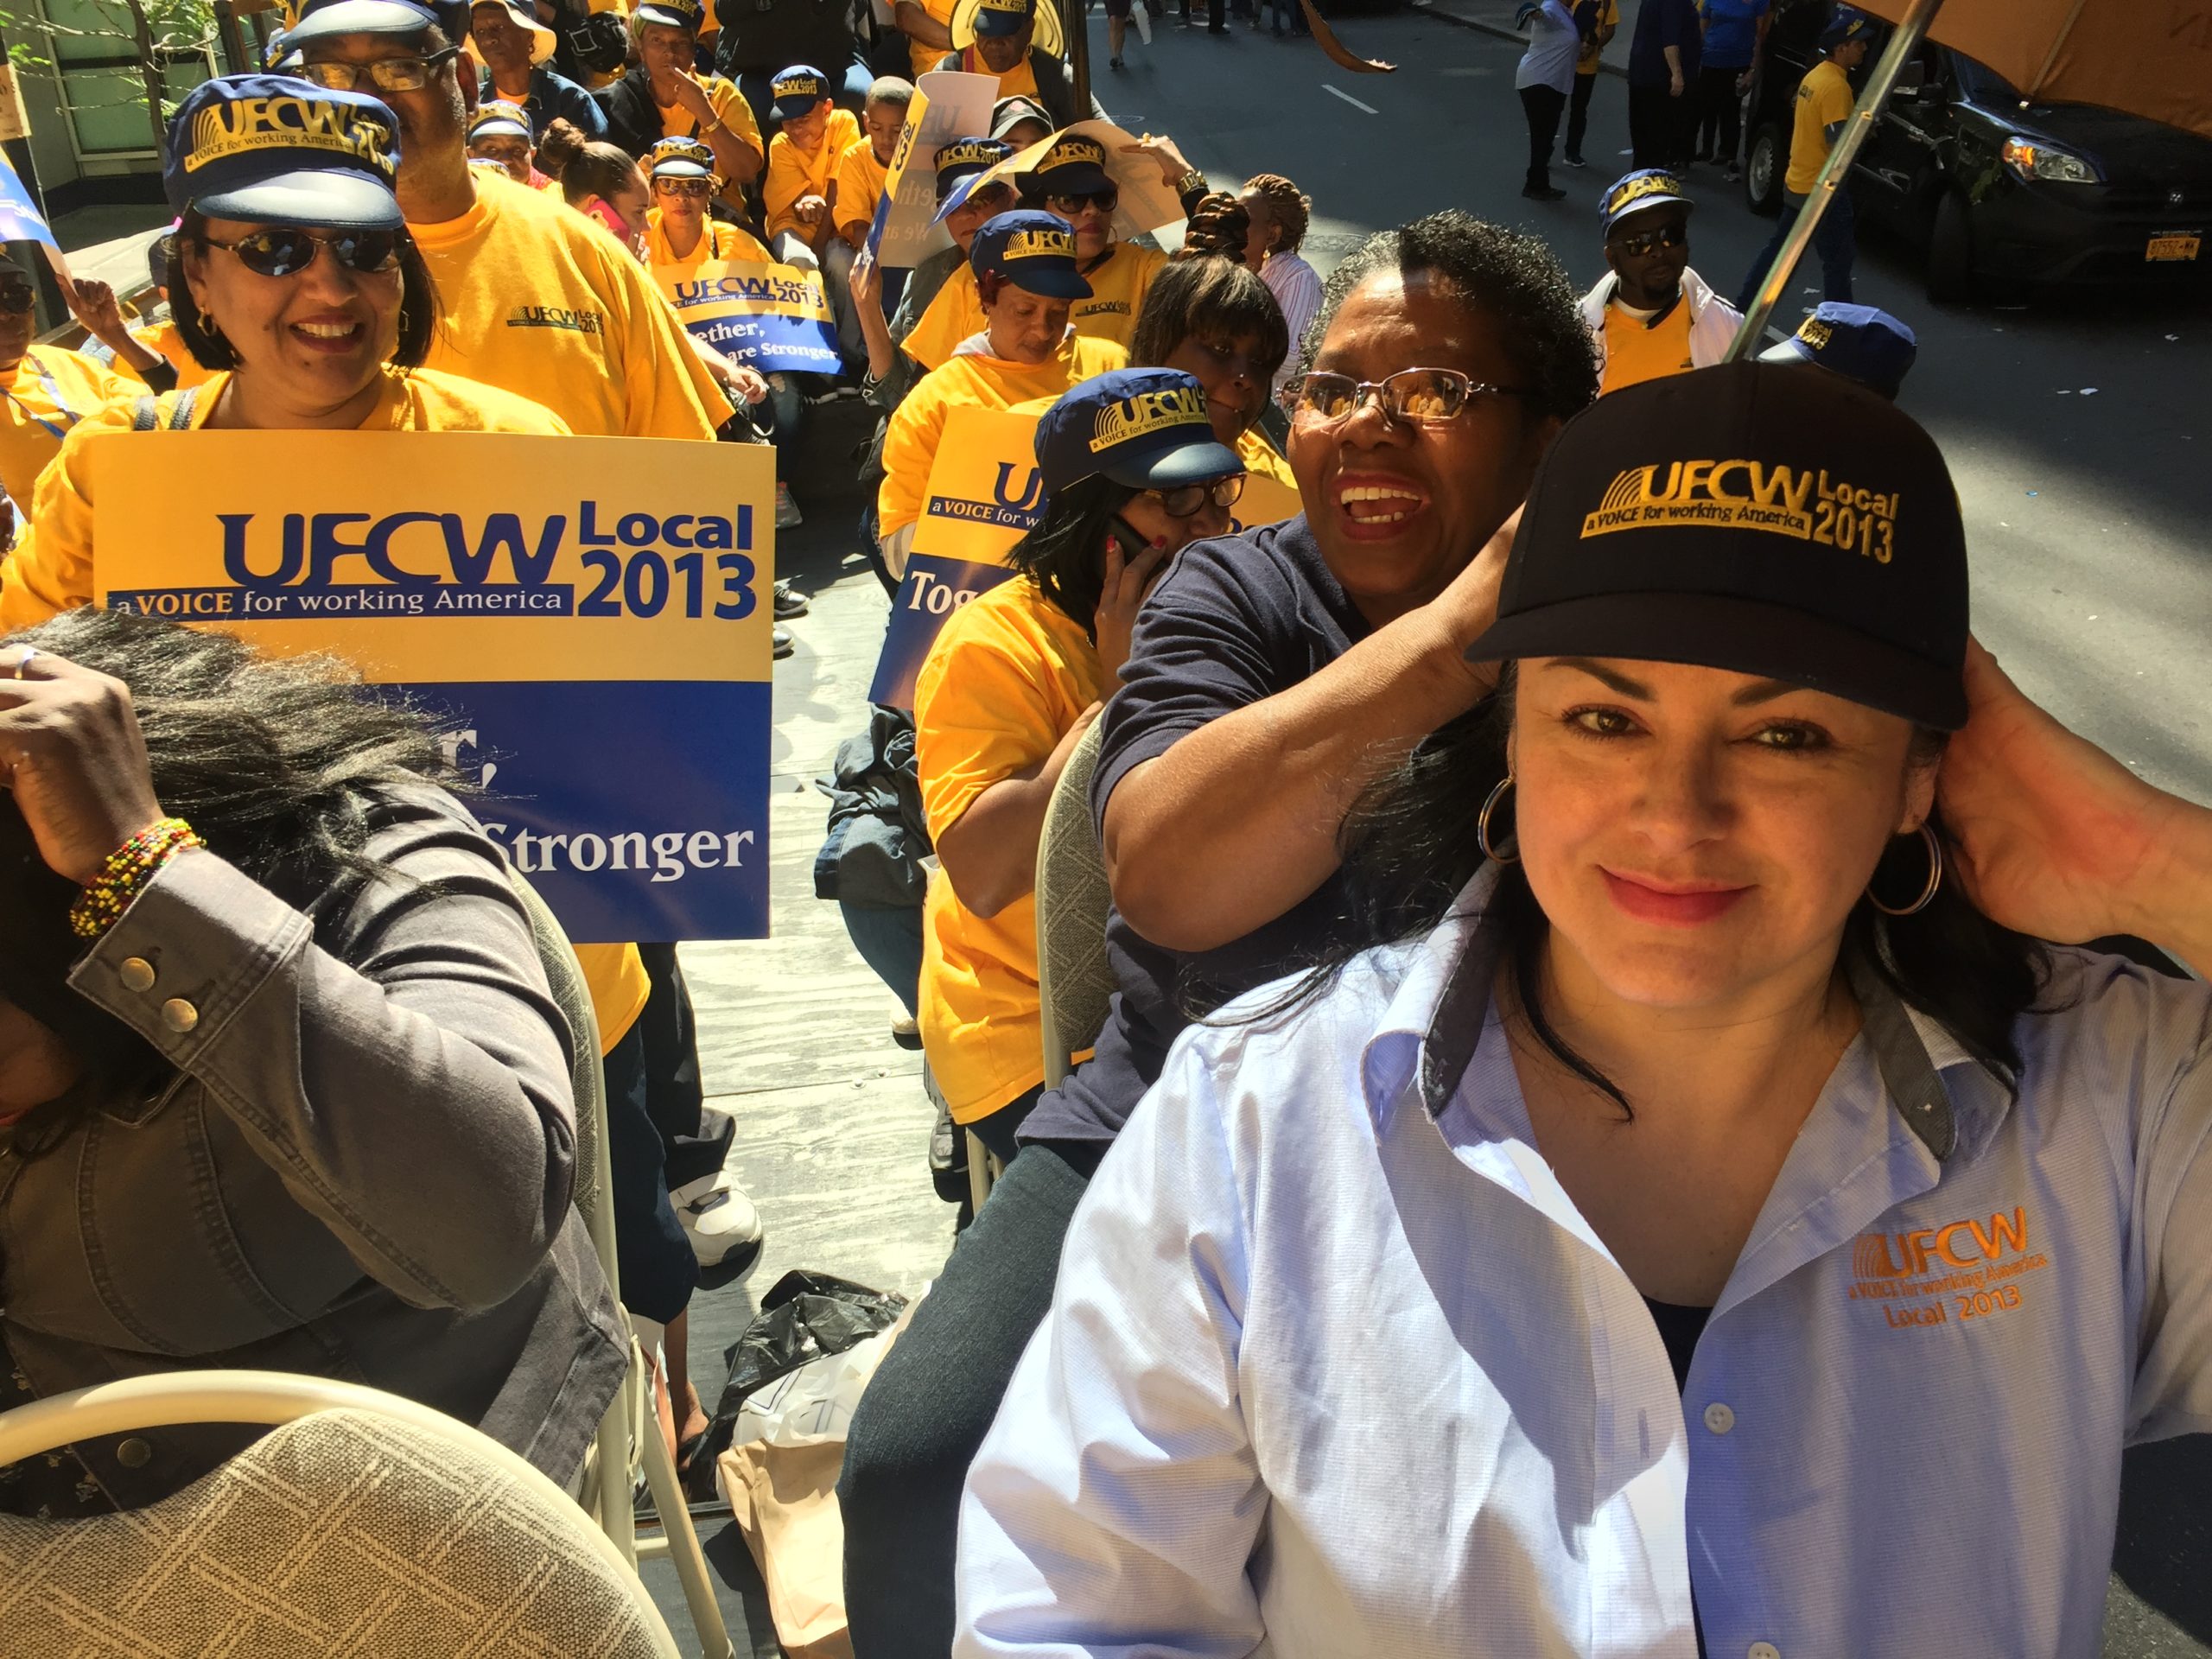 UFCW members organizing for better rights